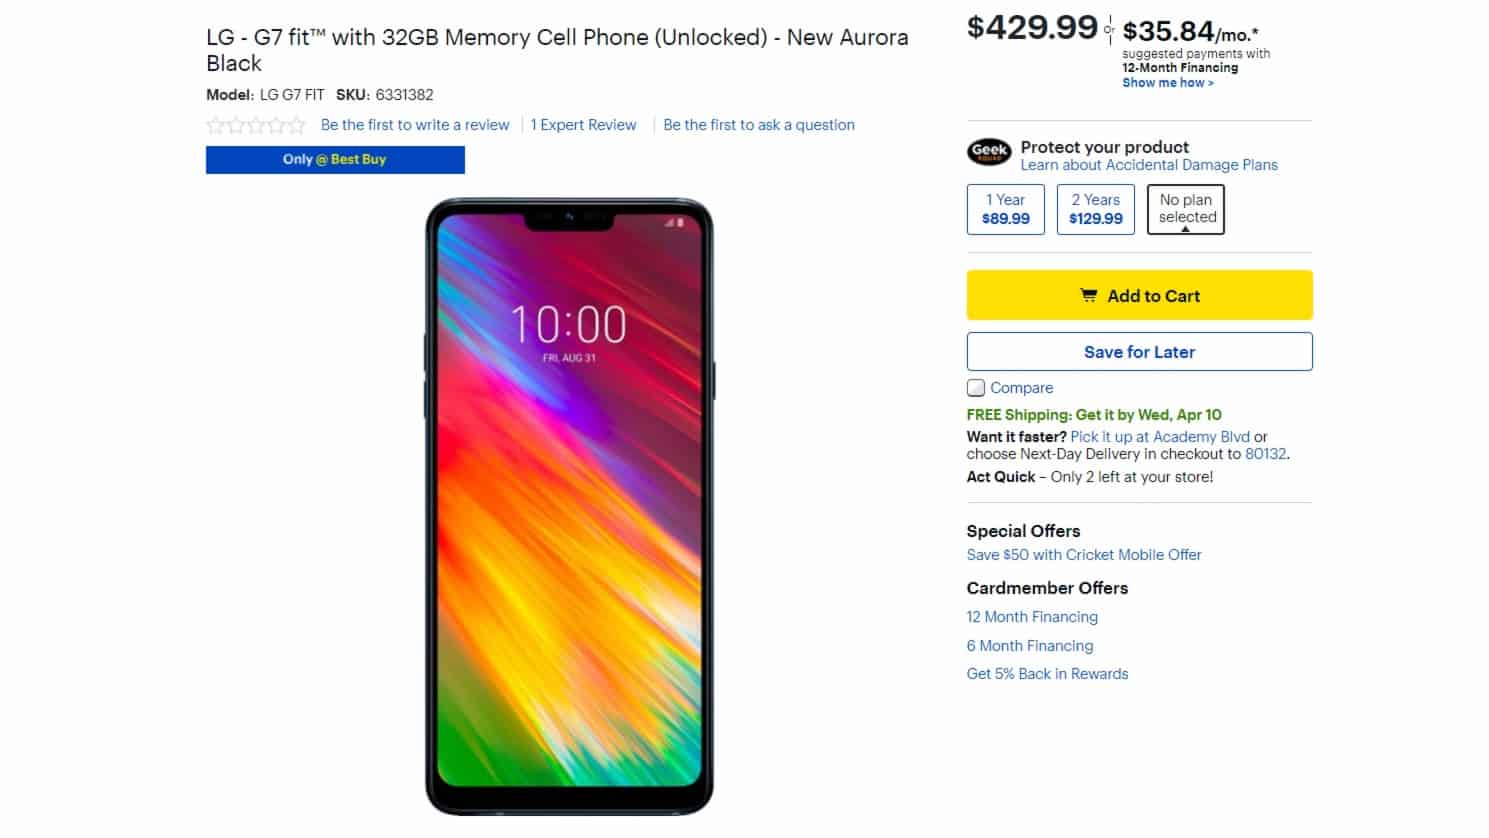 The LG G7 Fit now available at Best Buy.